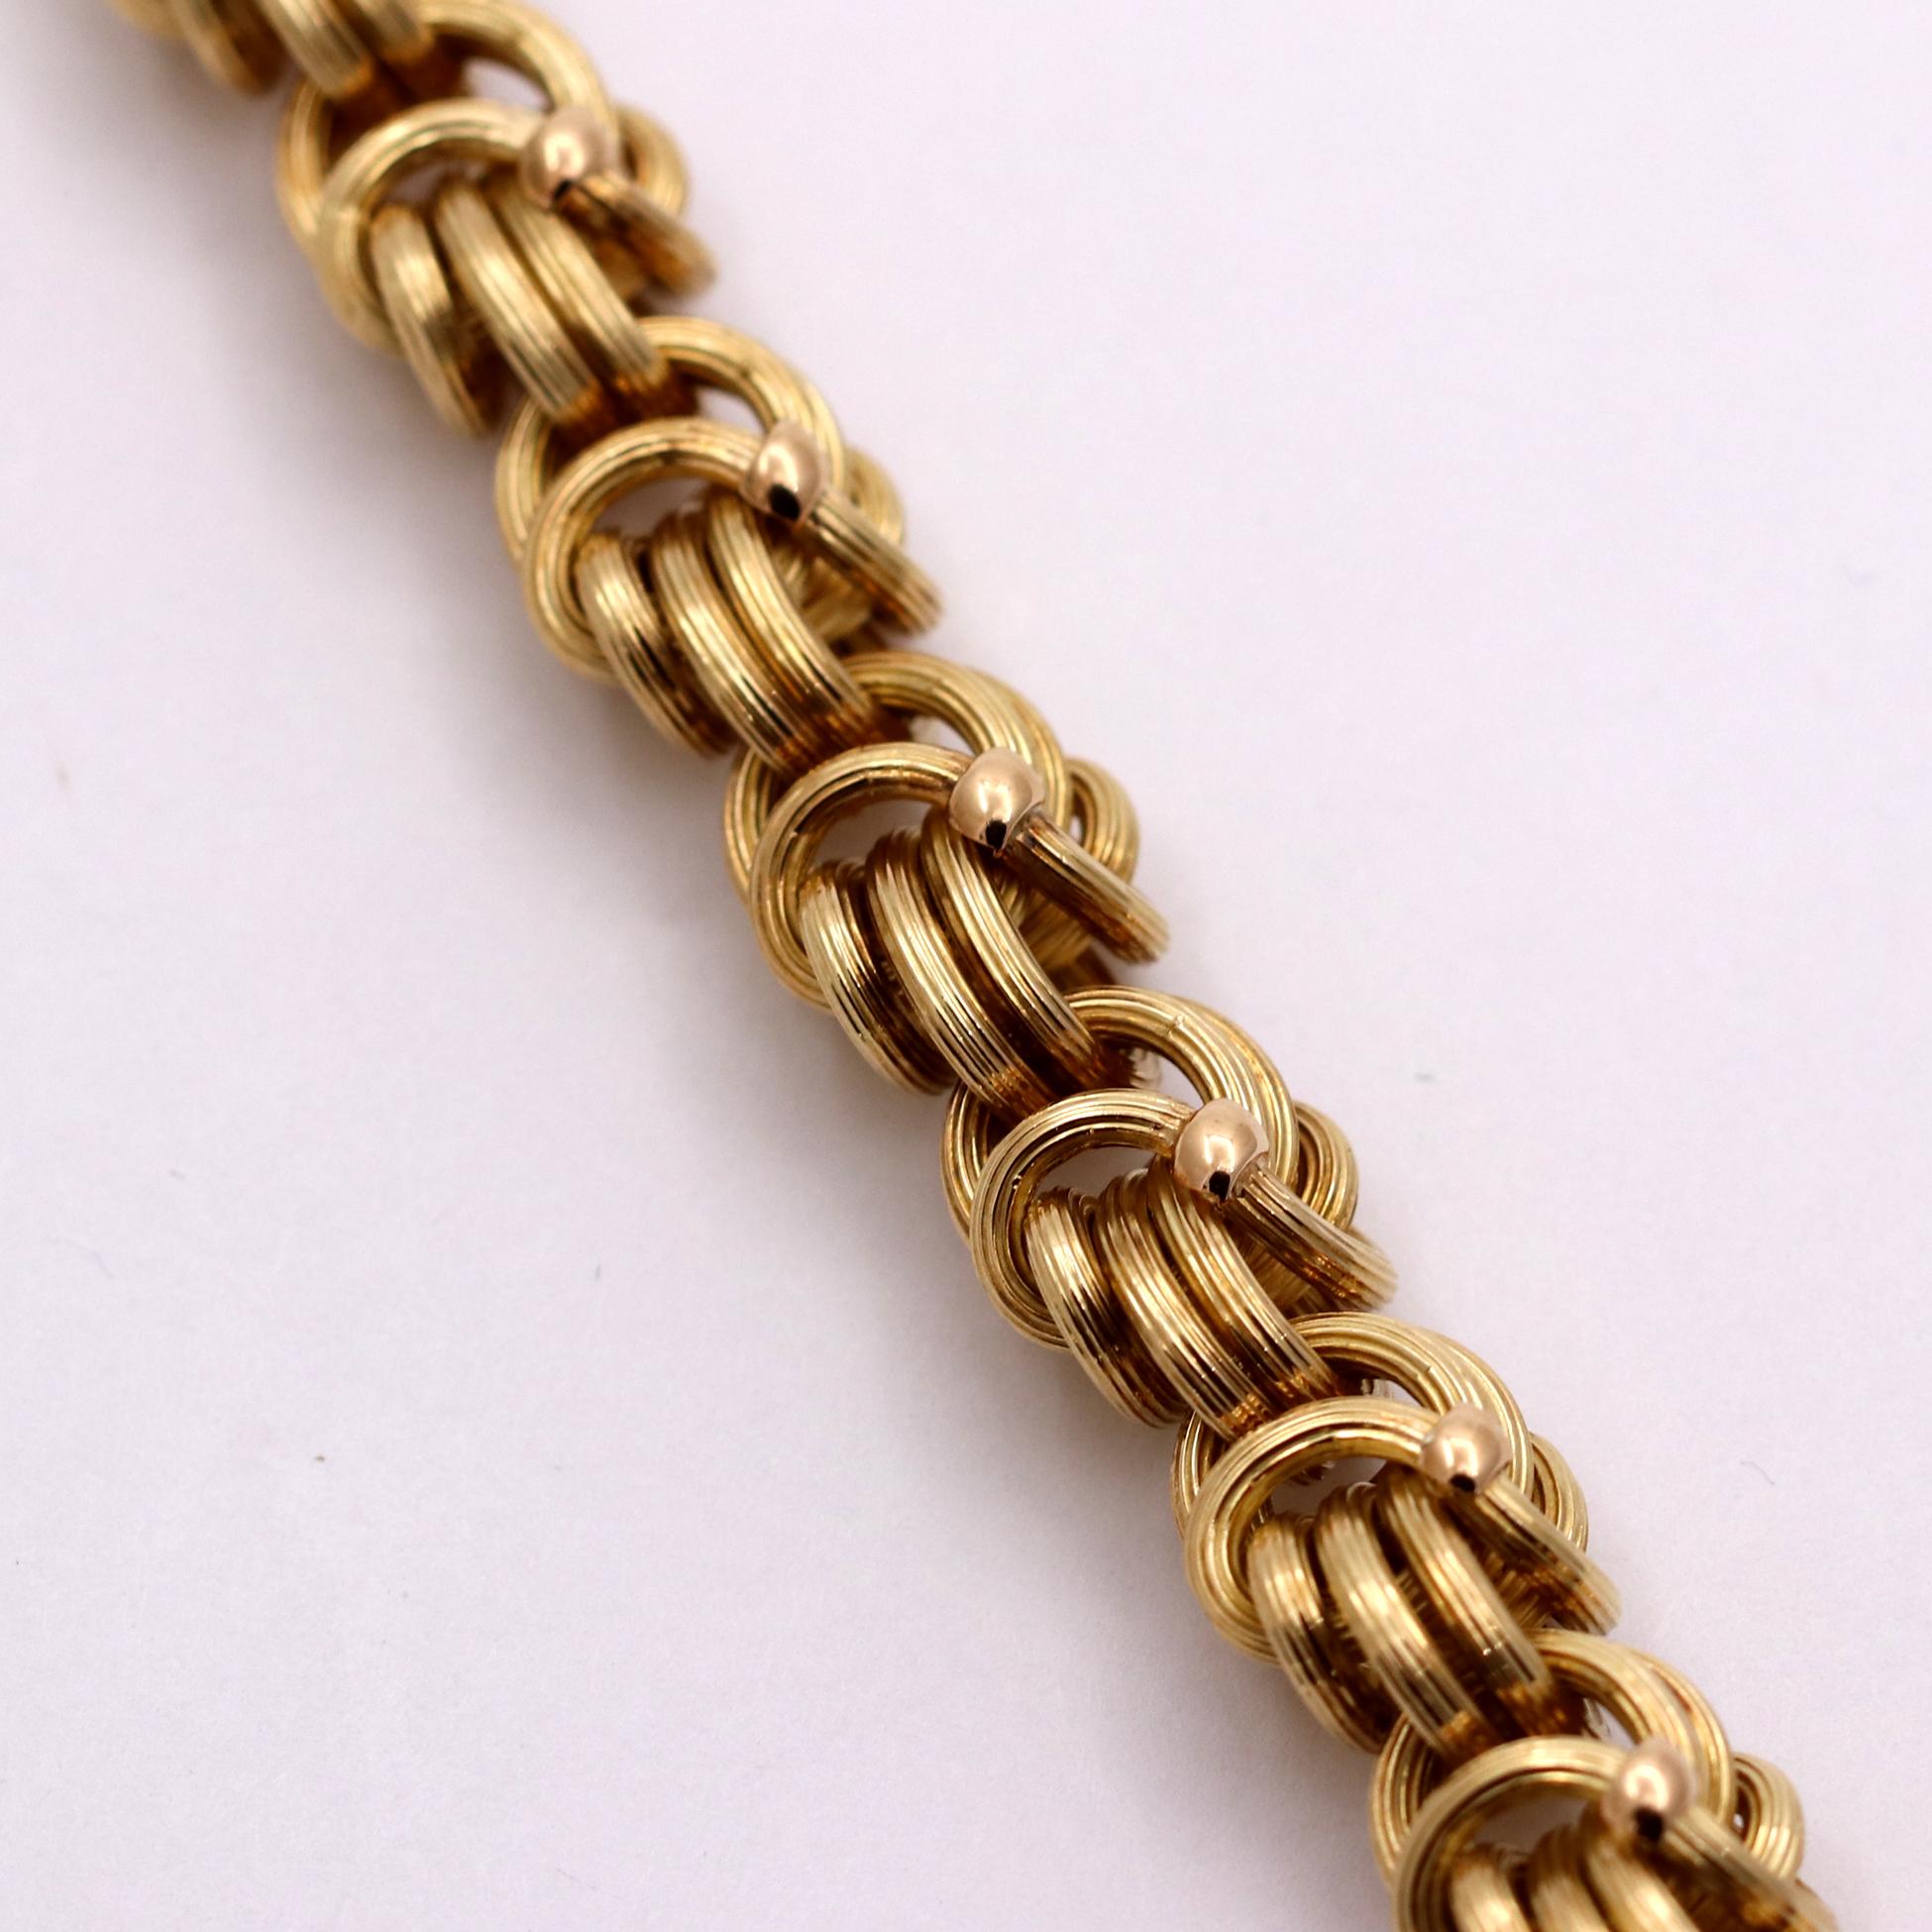 An 18K yellow gold bracelet by Tiffany comprised of ribbed Byzantine links, each with a high polished bead motif. This subtly styled, and detailed bracelet will fit wrists up to 7 1/4 inches. Measuring 1/2 an inch wide and 8 inches long, this